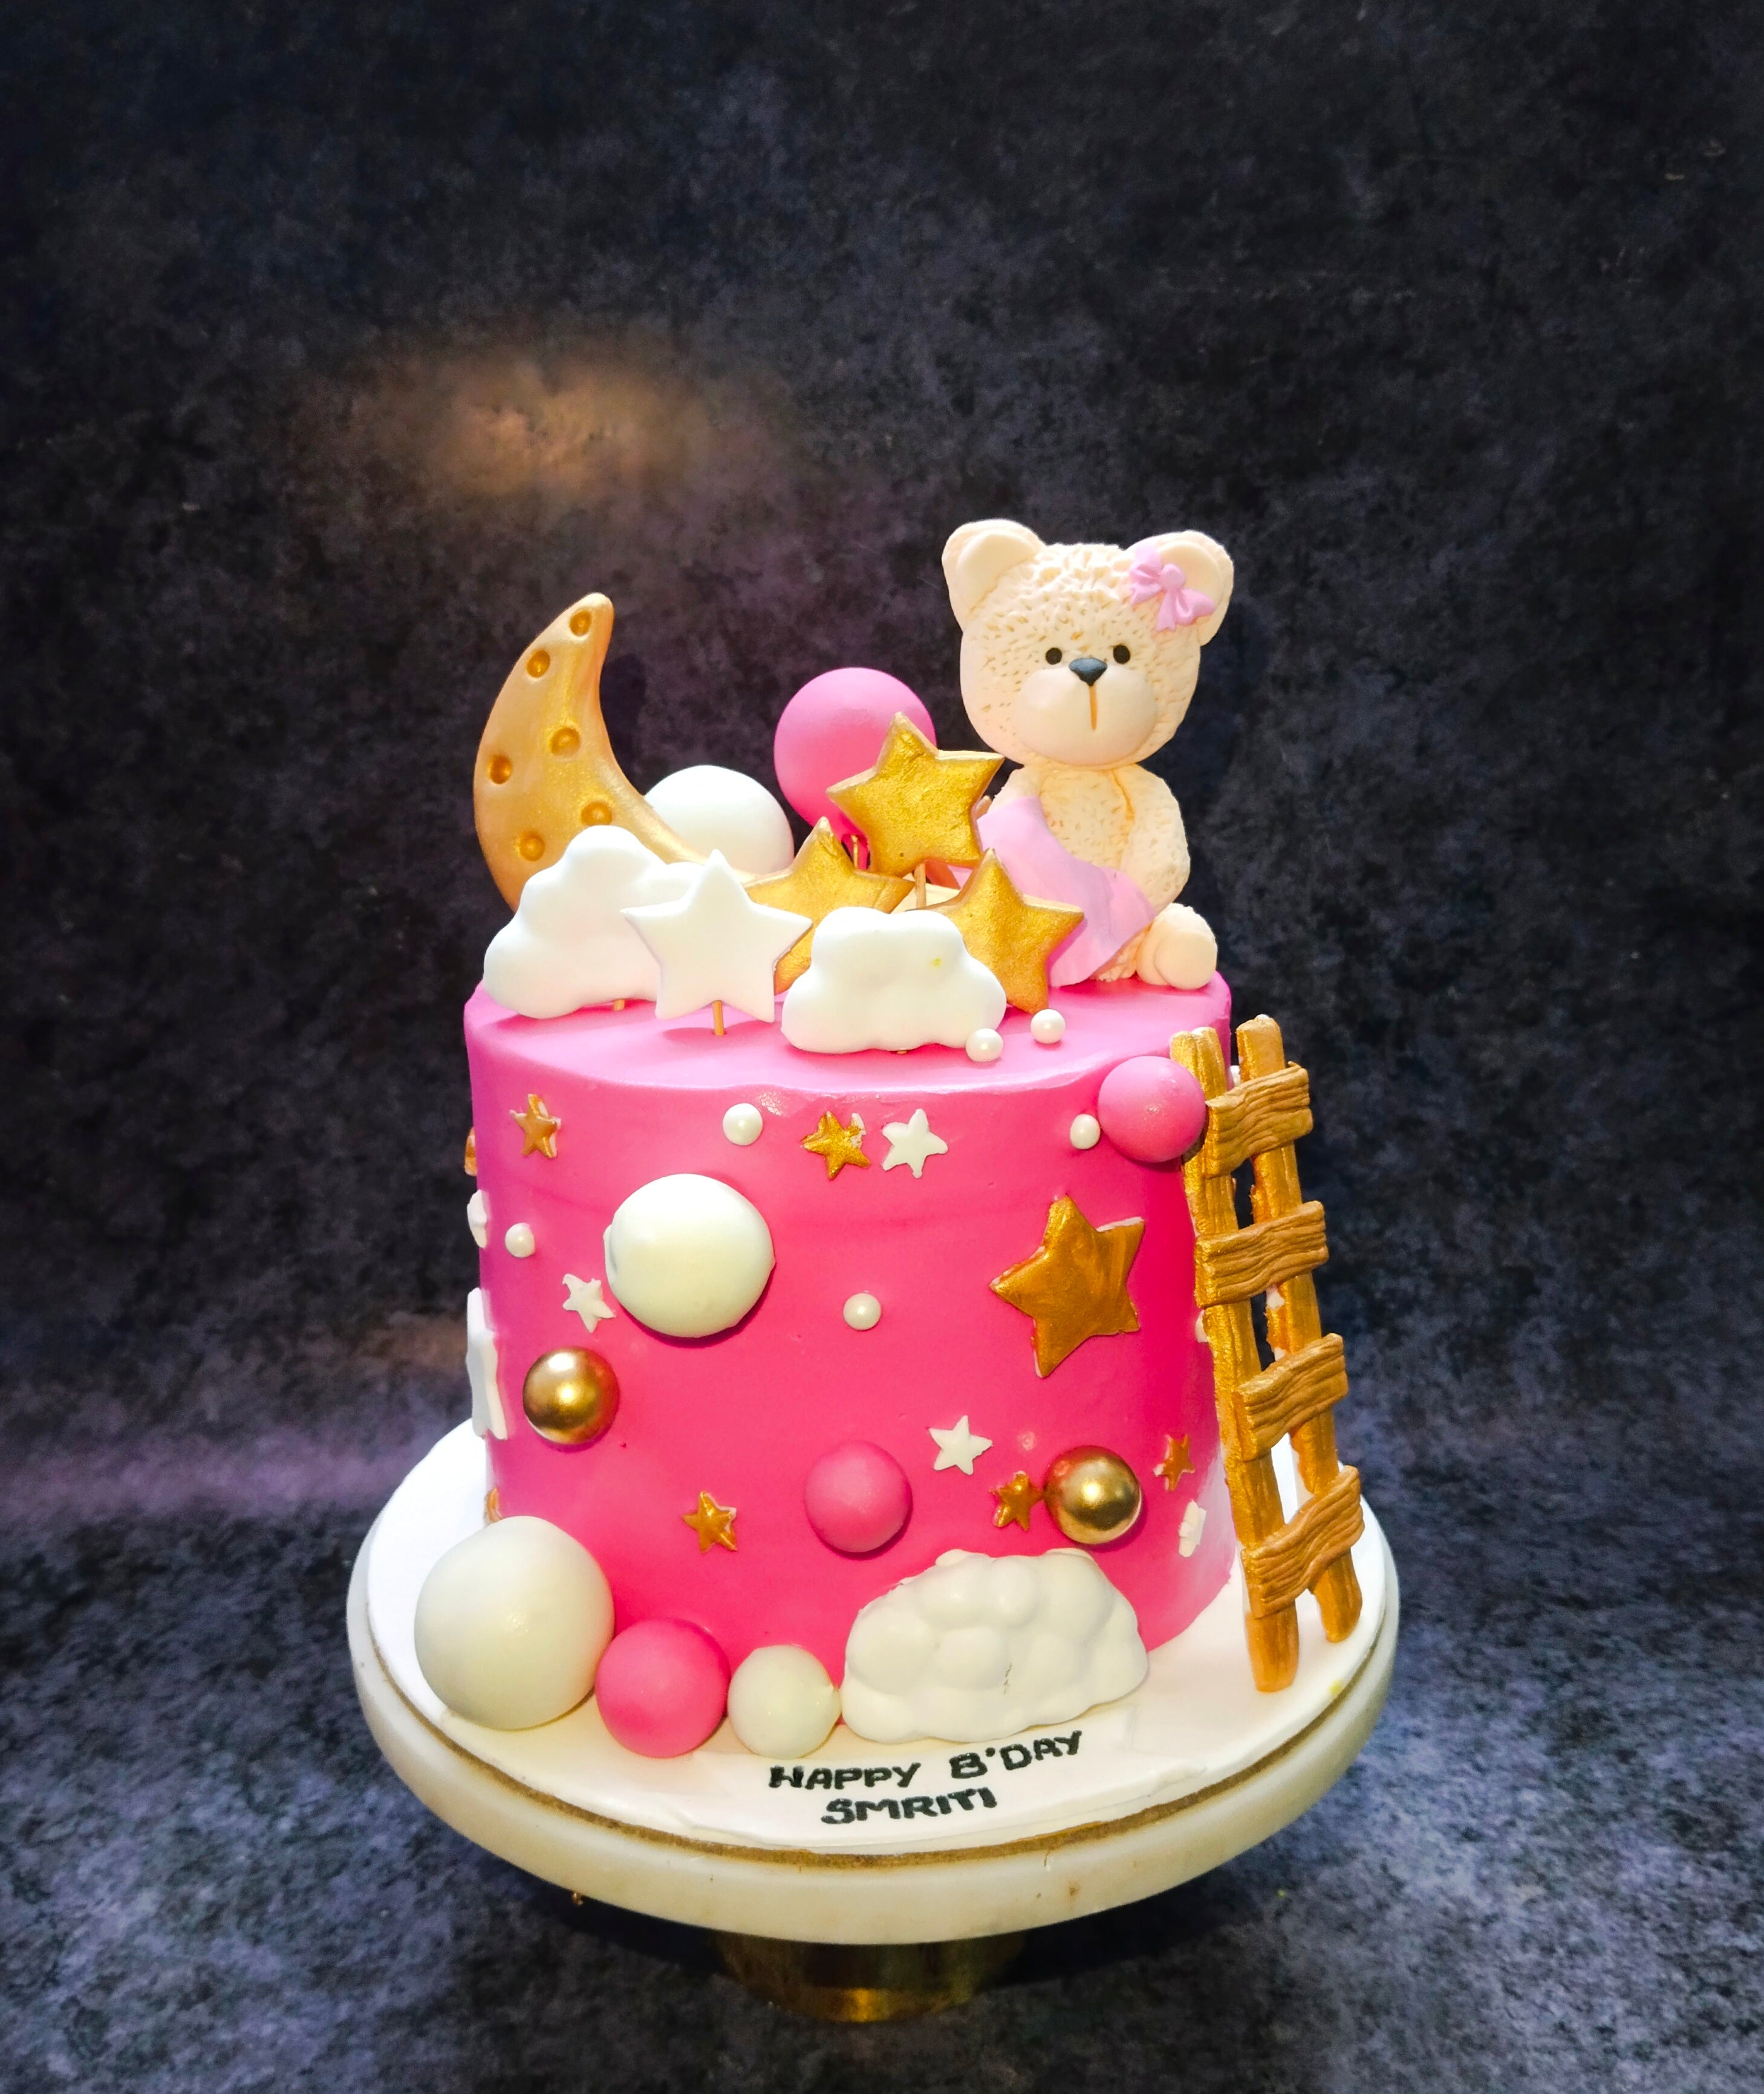 Teddy Bear Cake - Buy Online, Free UK Delivery — New Cakes